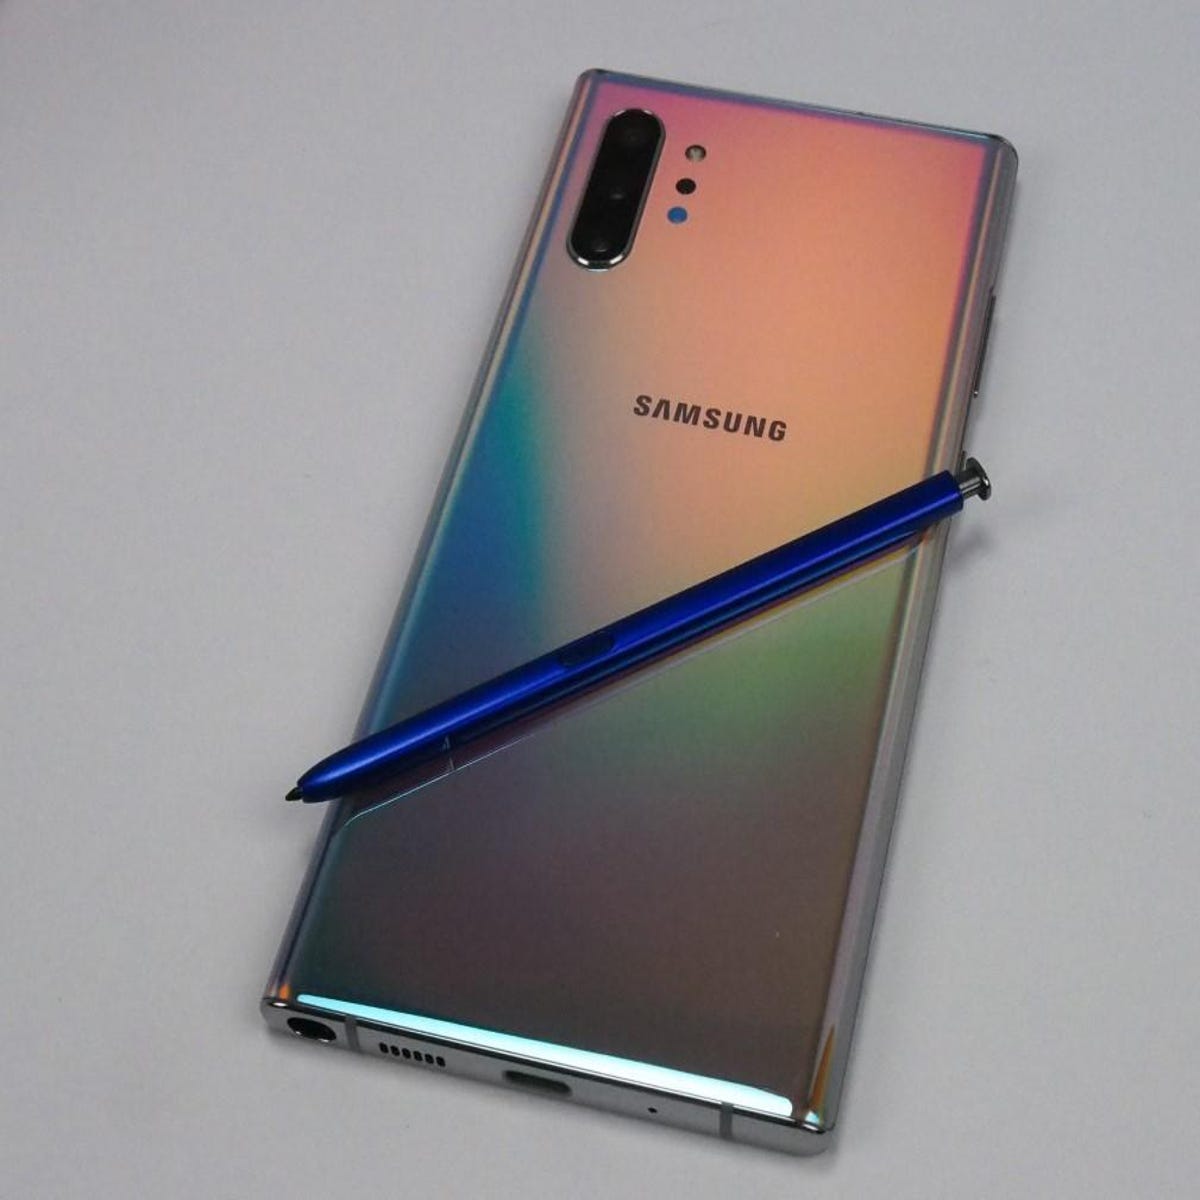 Samsung Galaxy Note 10 Plus review: Best business phone improves in speed  and S Pen capability | ZDNet